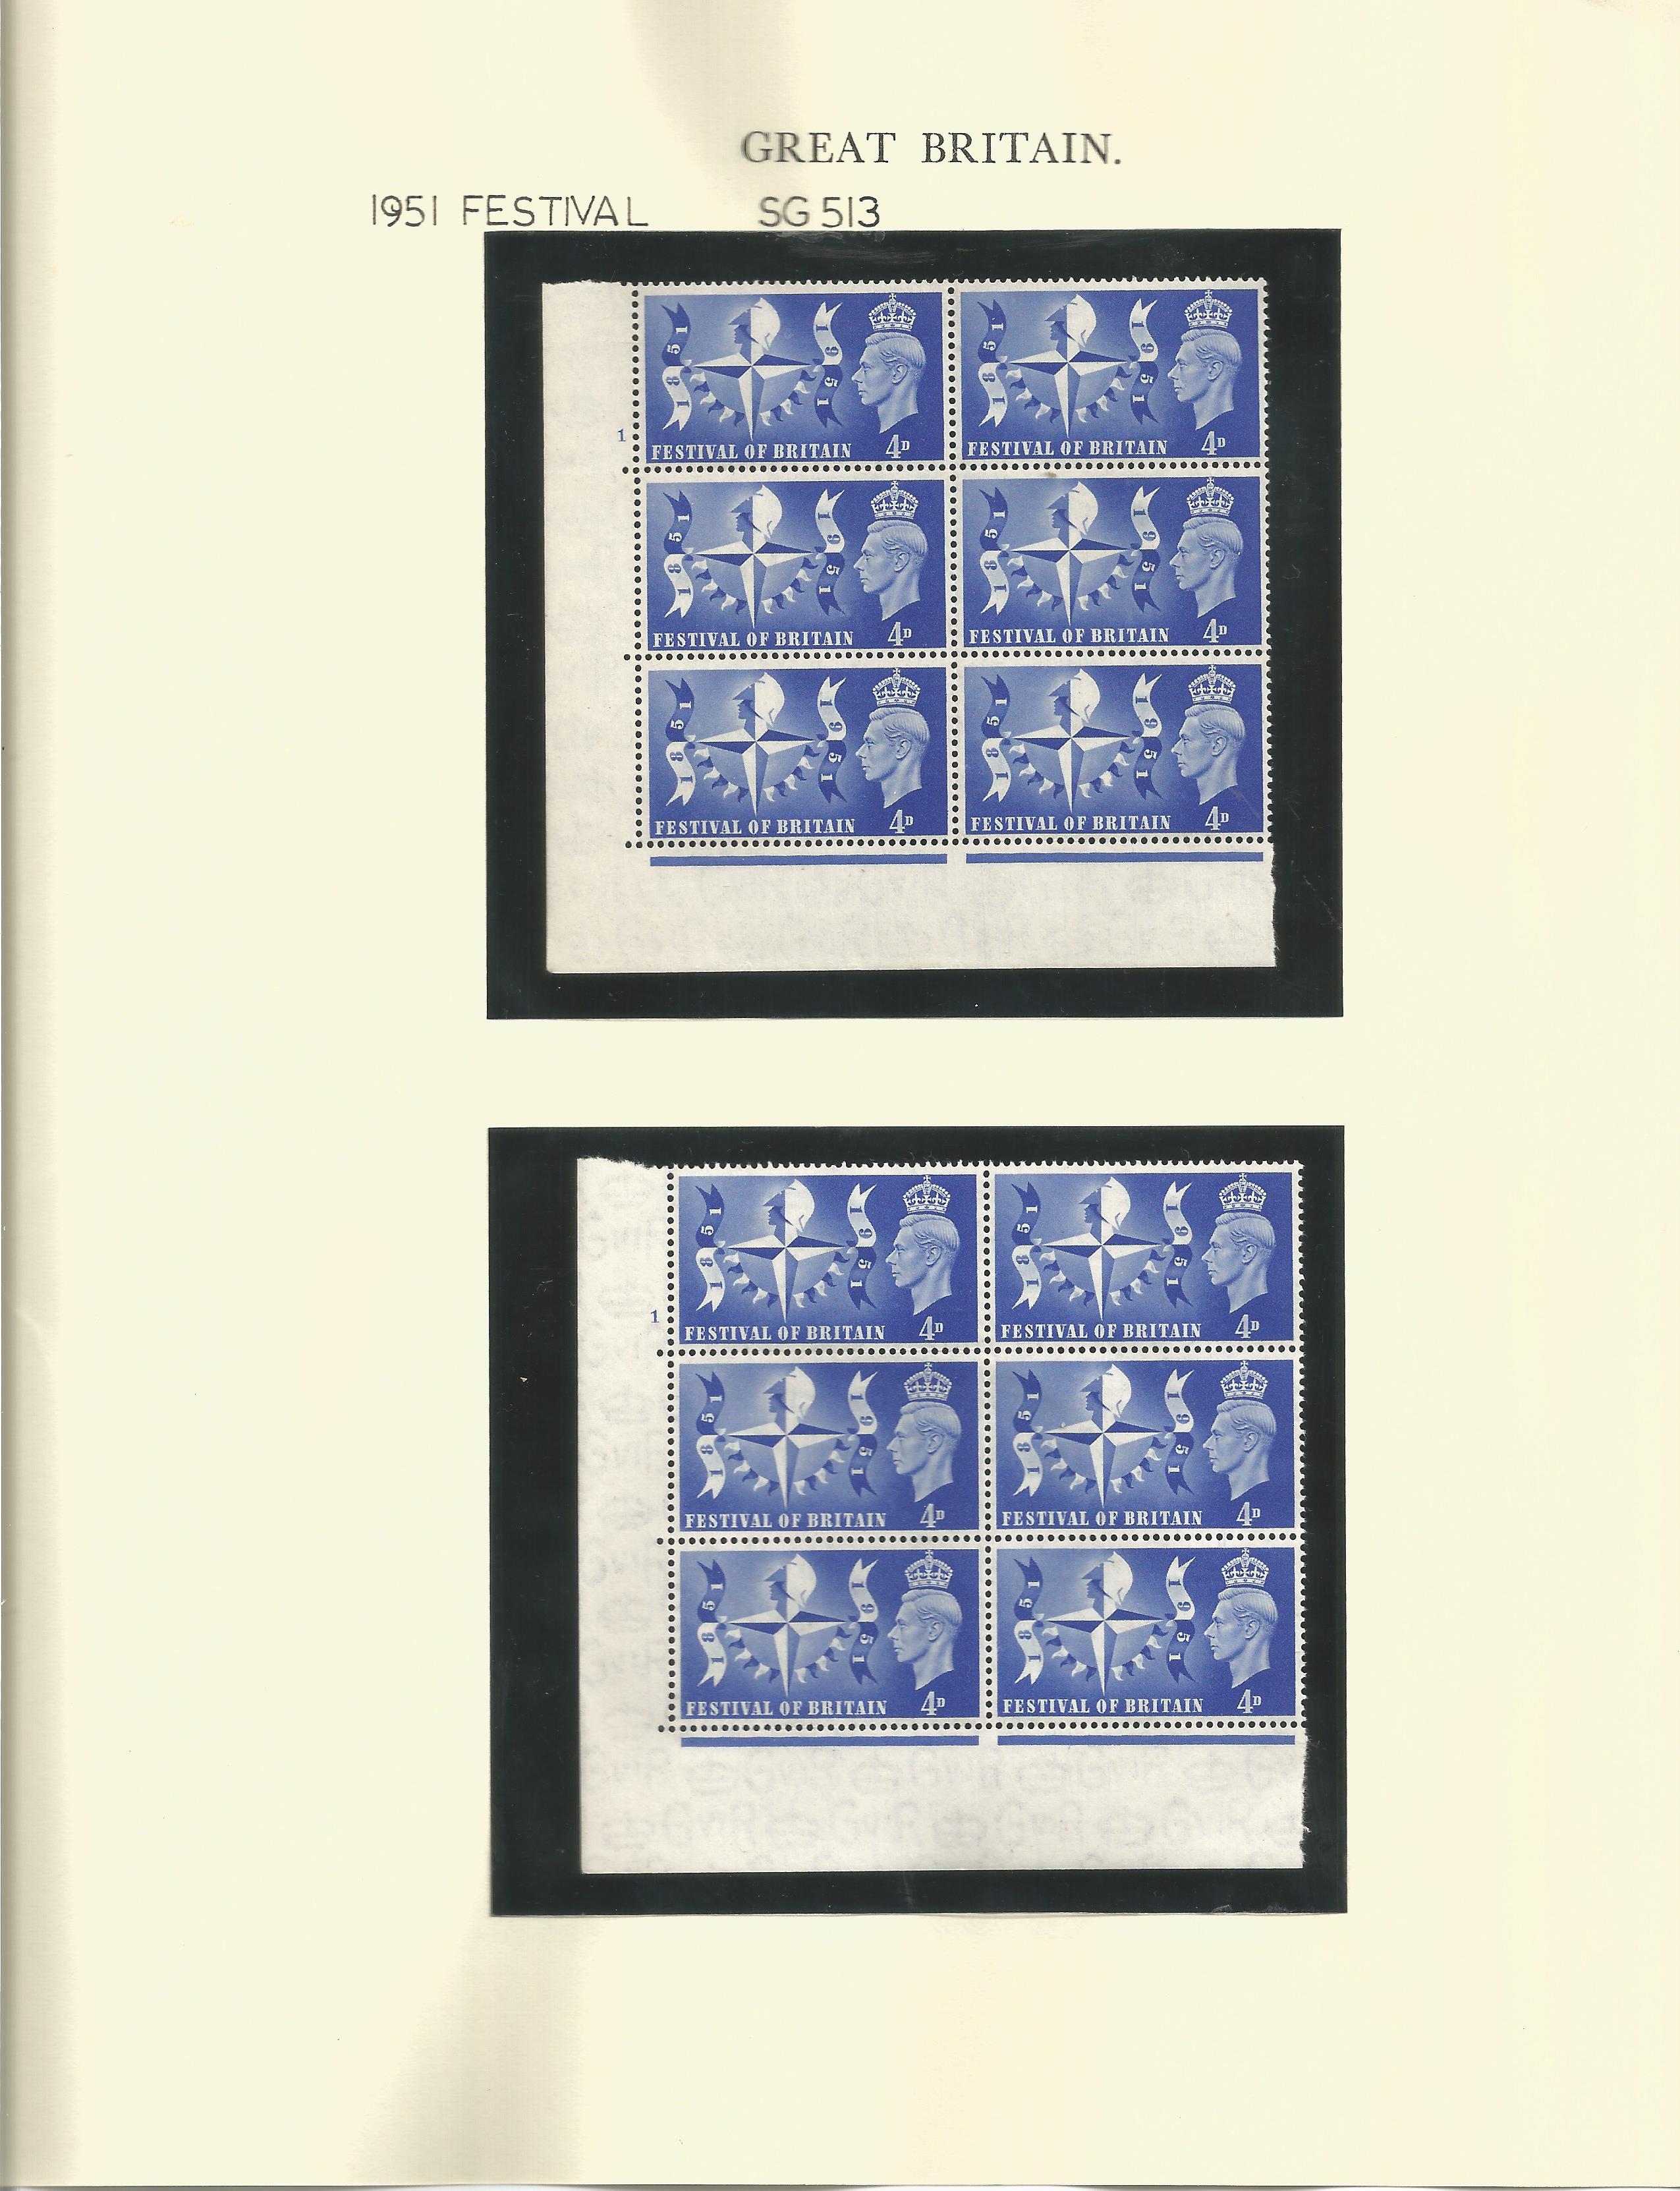 GB Mint Stamps Festival of Britain, SG 513, 4 x Cylinder Block set of 6 Stamps 12 x Two and half - Image 2 of 2